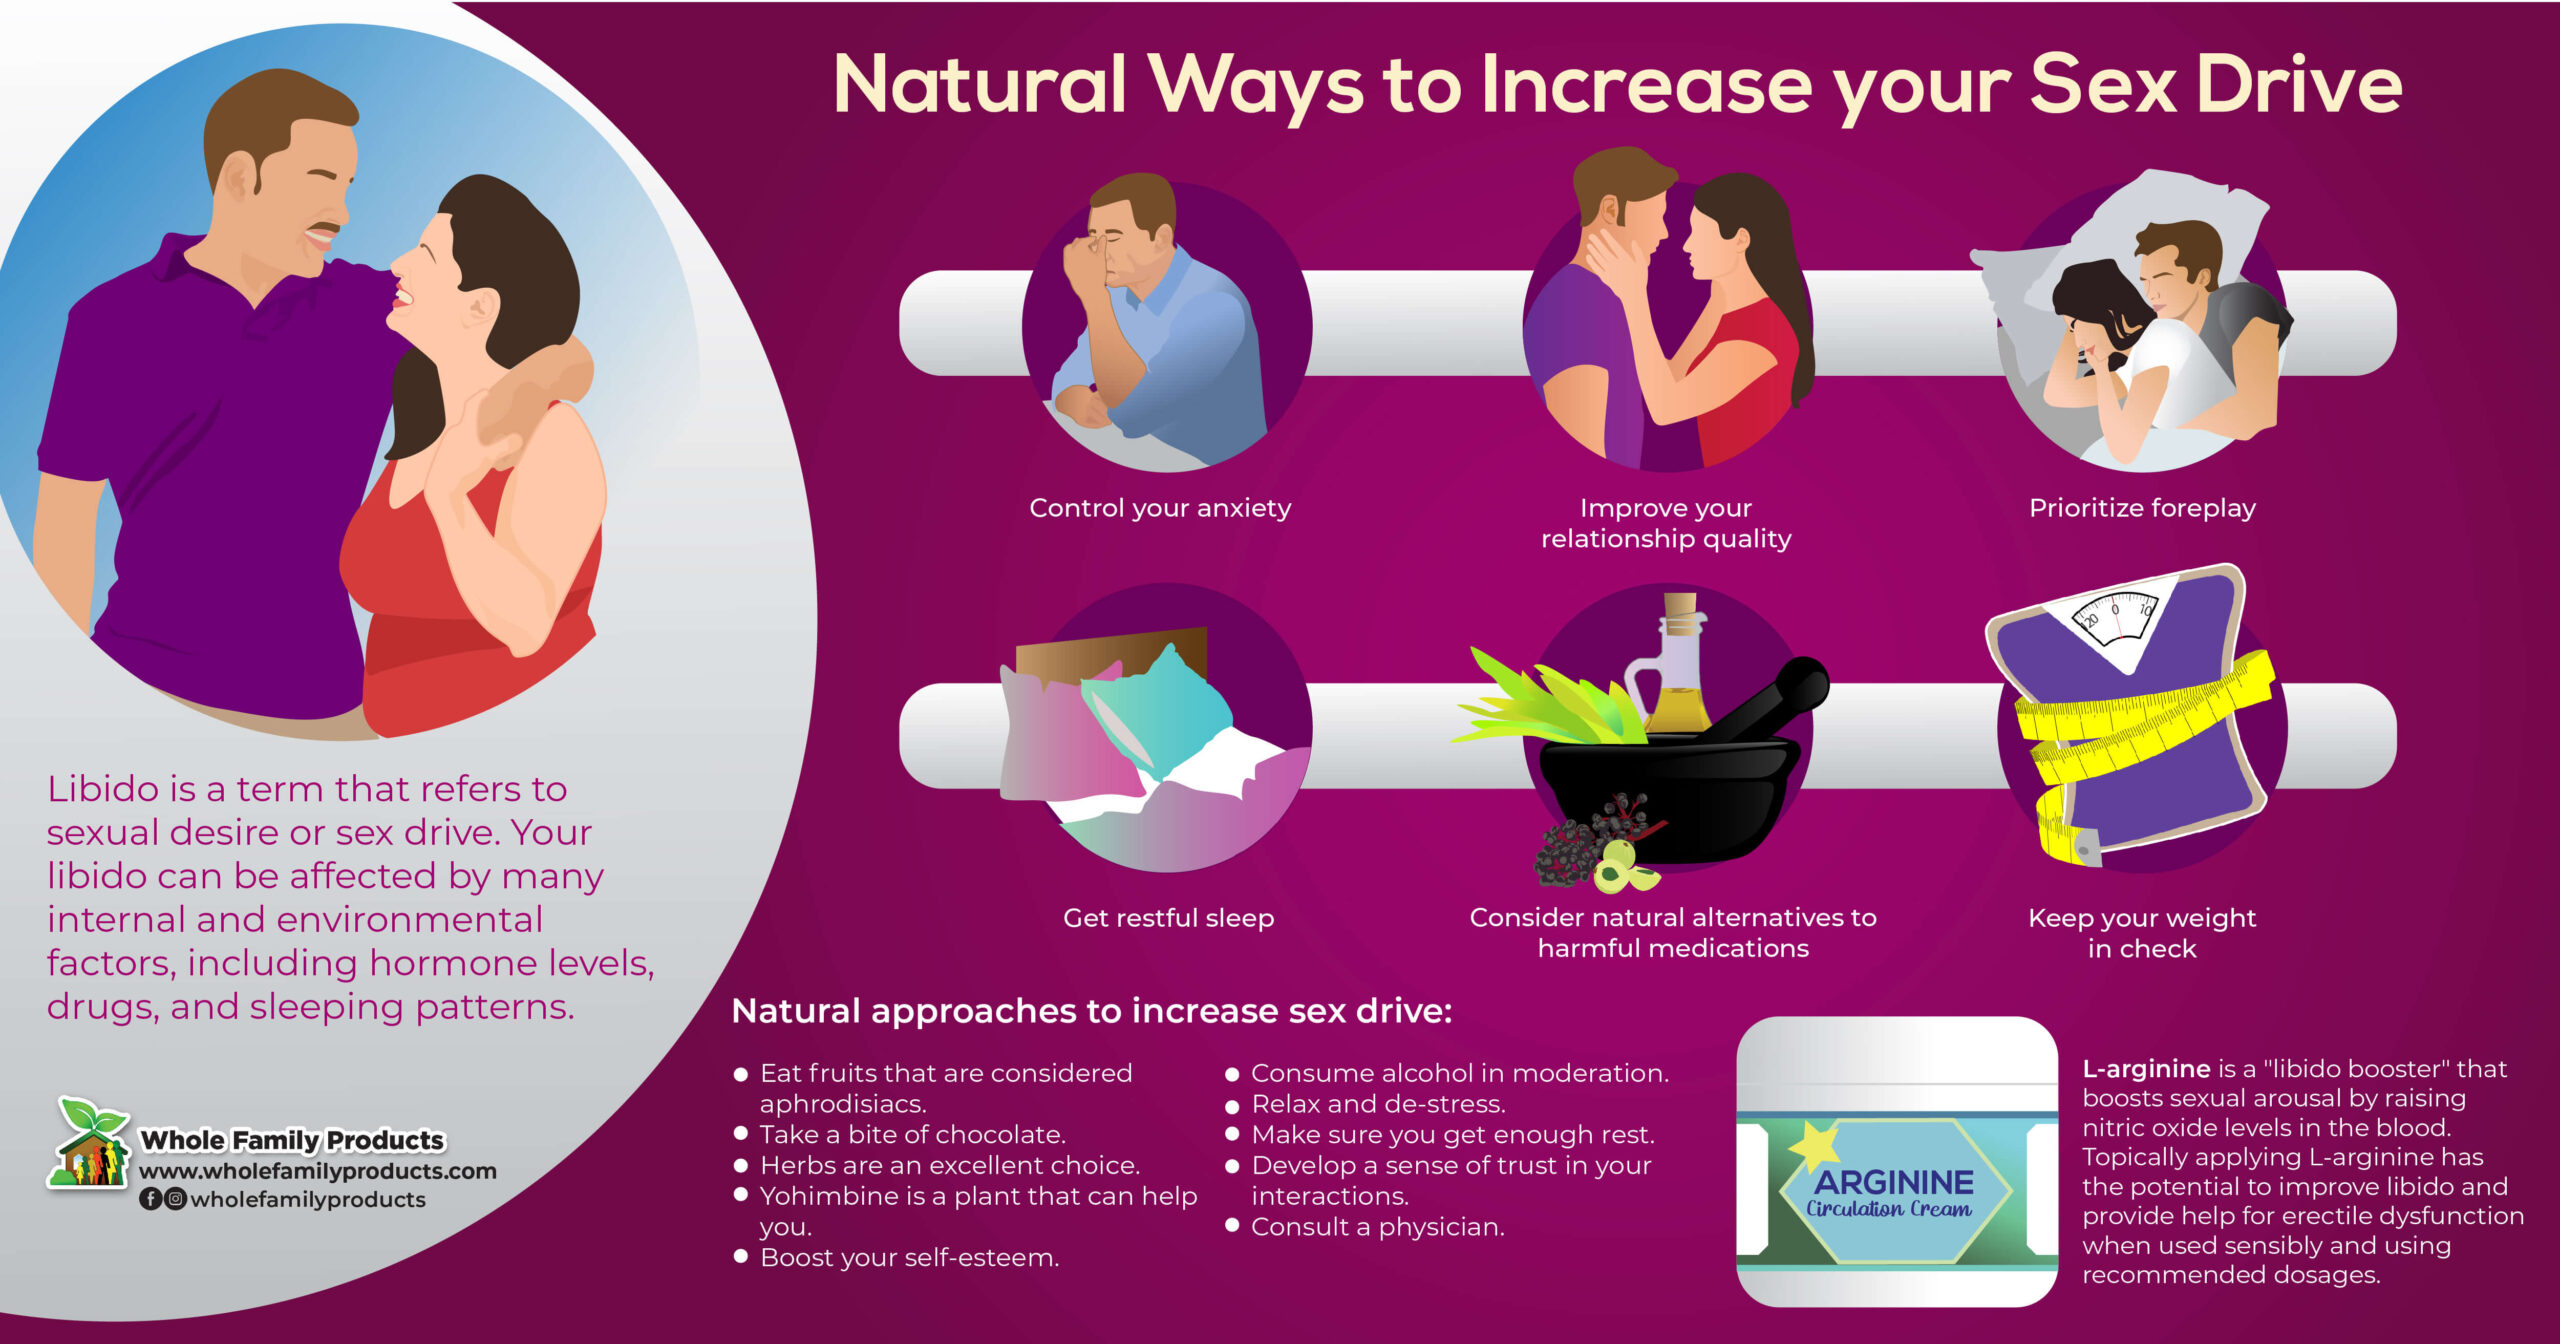 Natural Ways to Increase Your Sex Drive